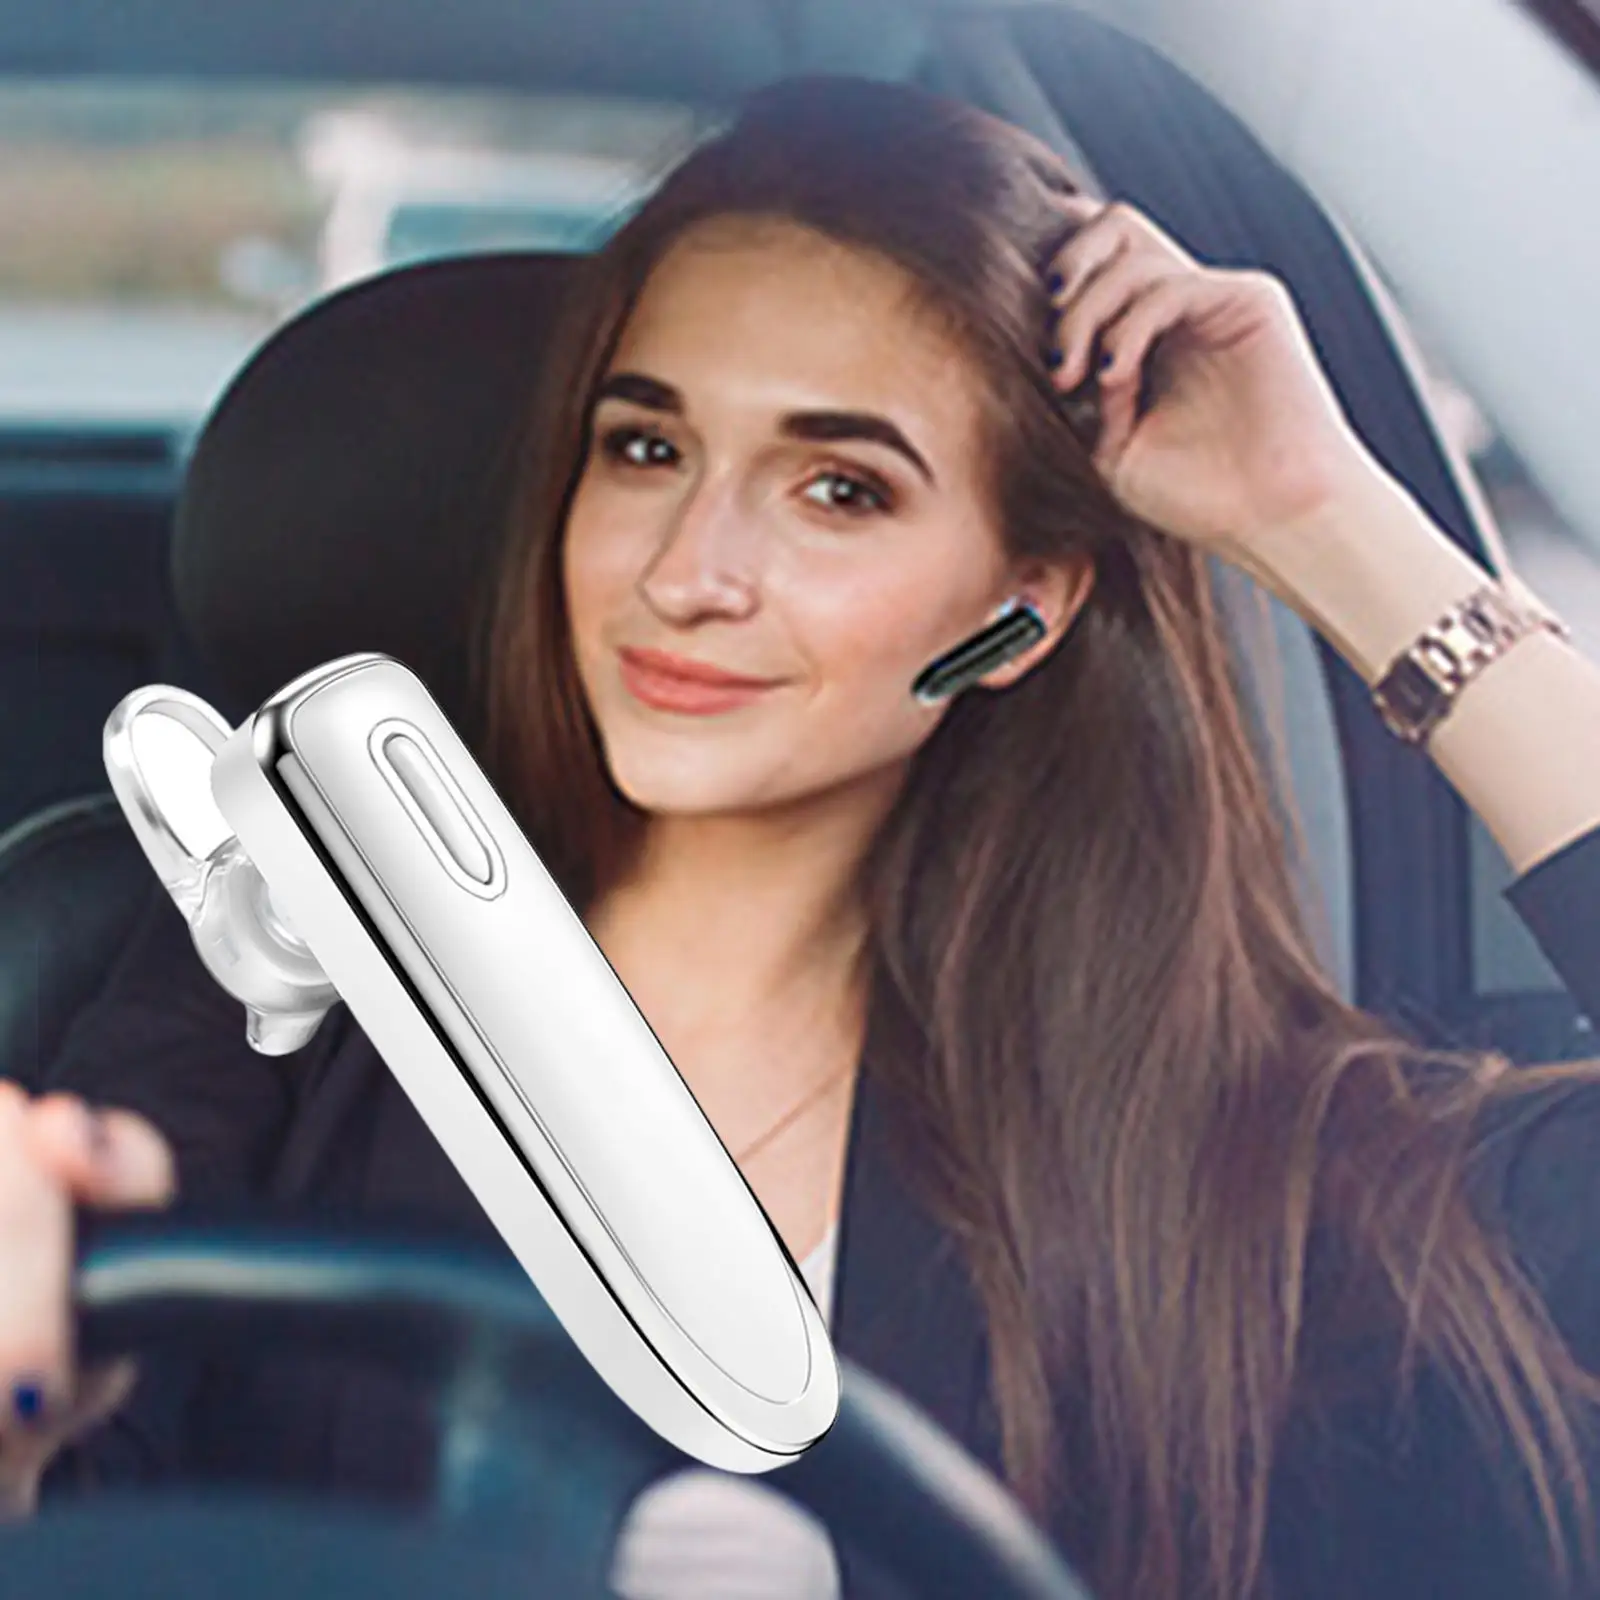 Bluetooth 5.1 Earpiece Hands-Free with CVC8.0 Mic Headset for Sports for iOS Android Devices